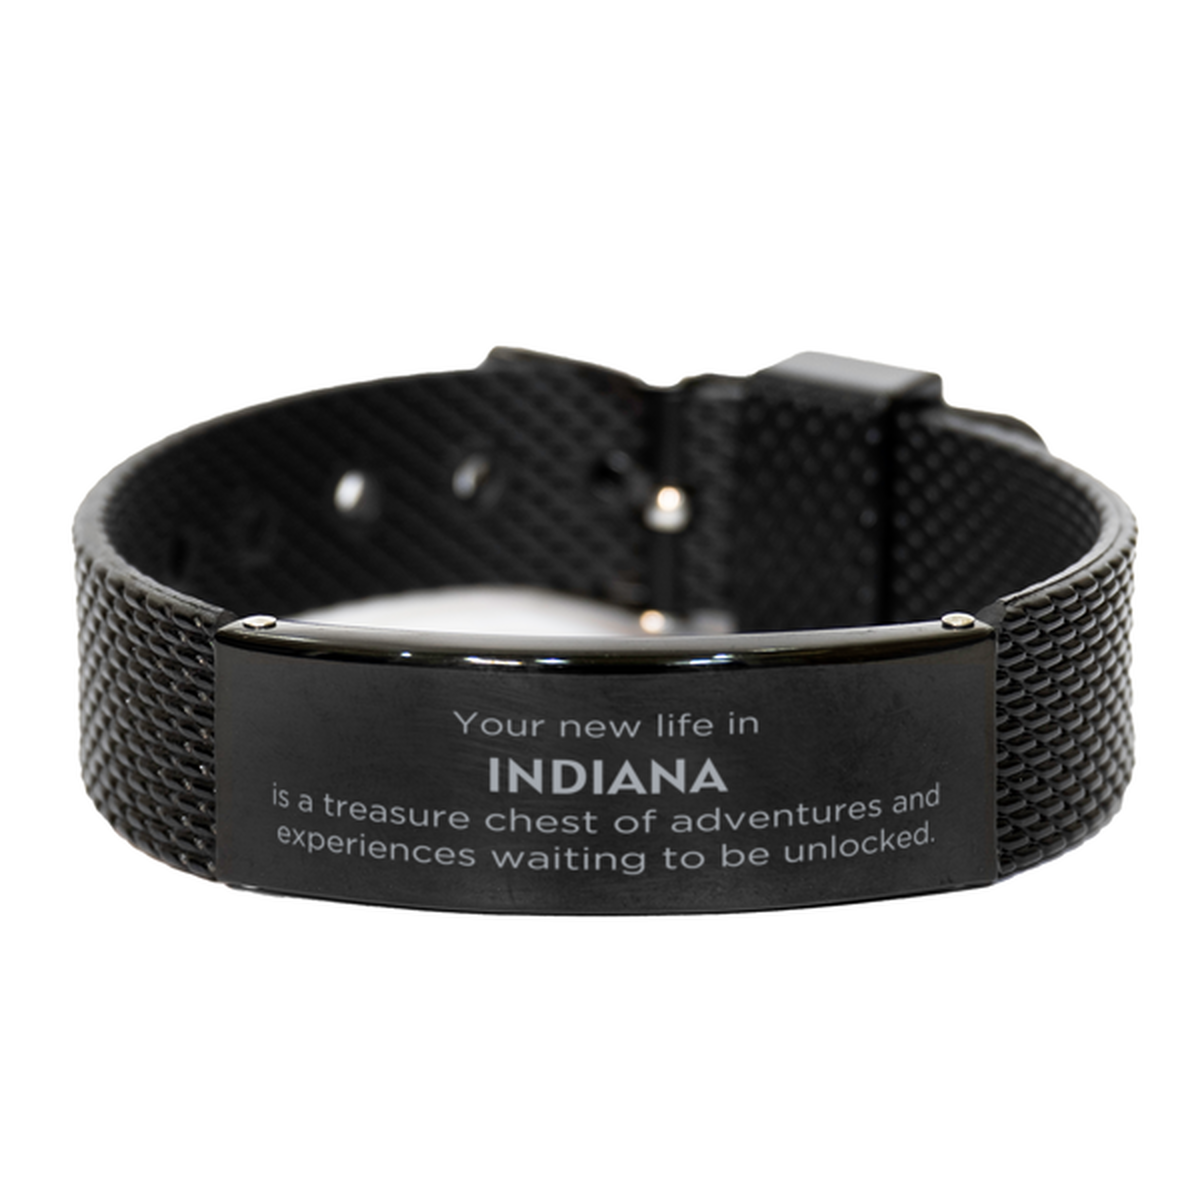 Moving to Indiana Gifts, Your new life in Indiana, Long Distance Indiana Christmas Black Shark Mesh Bracelet For Men, Women, Friends, Coworkers